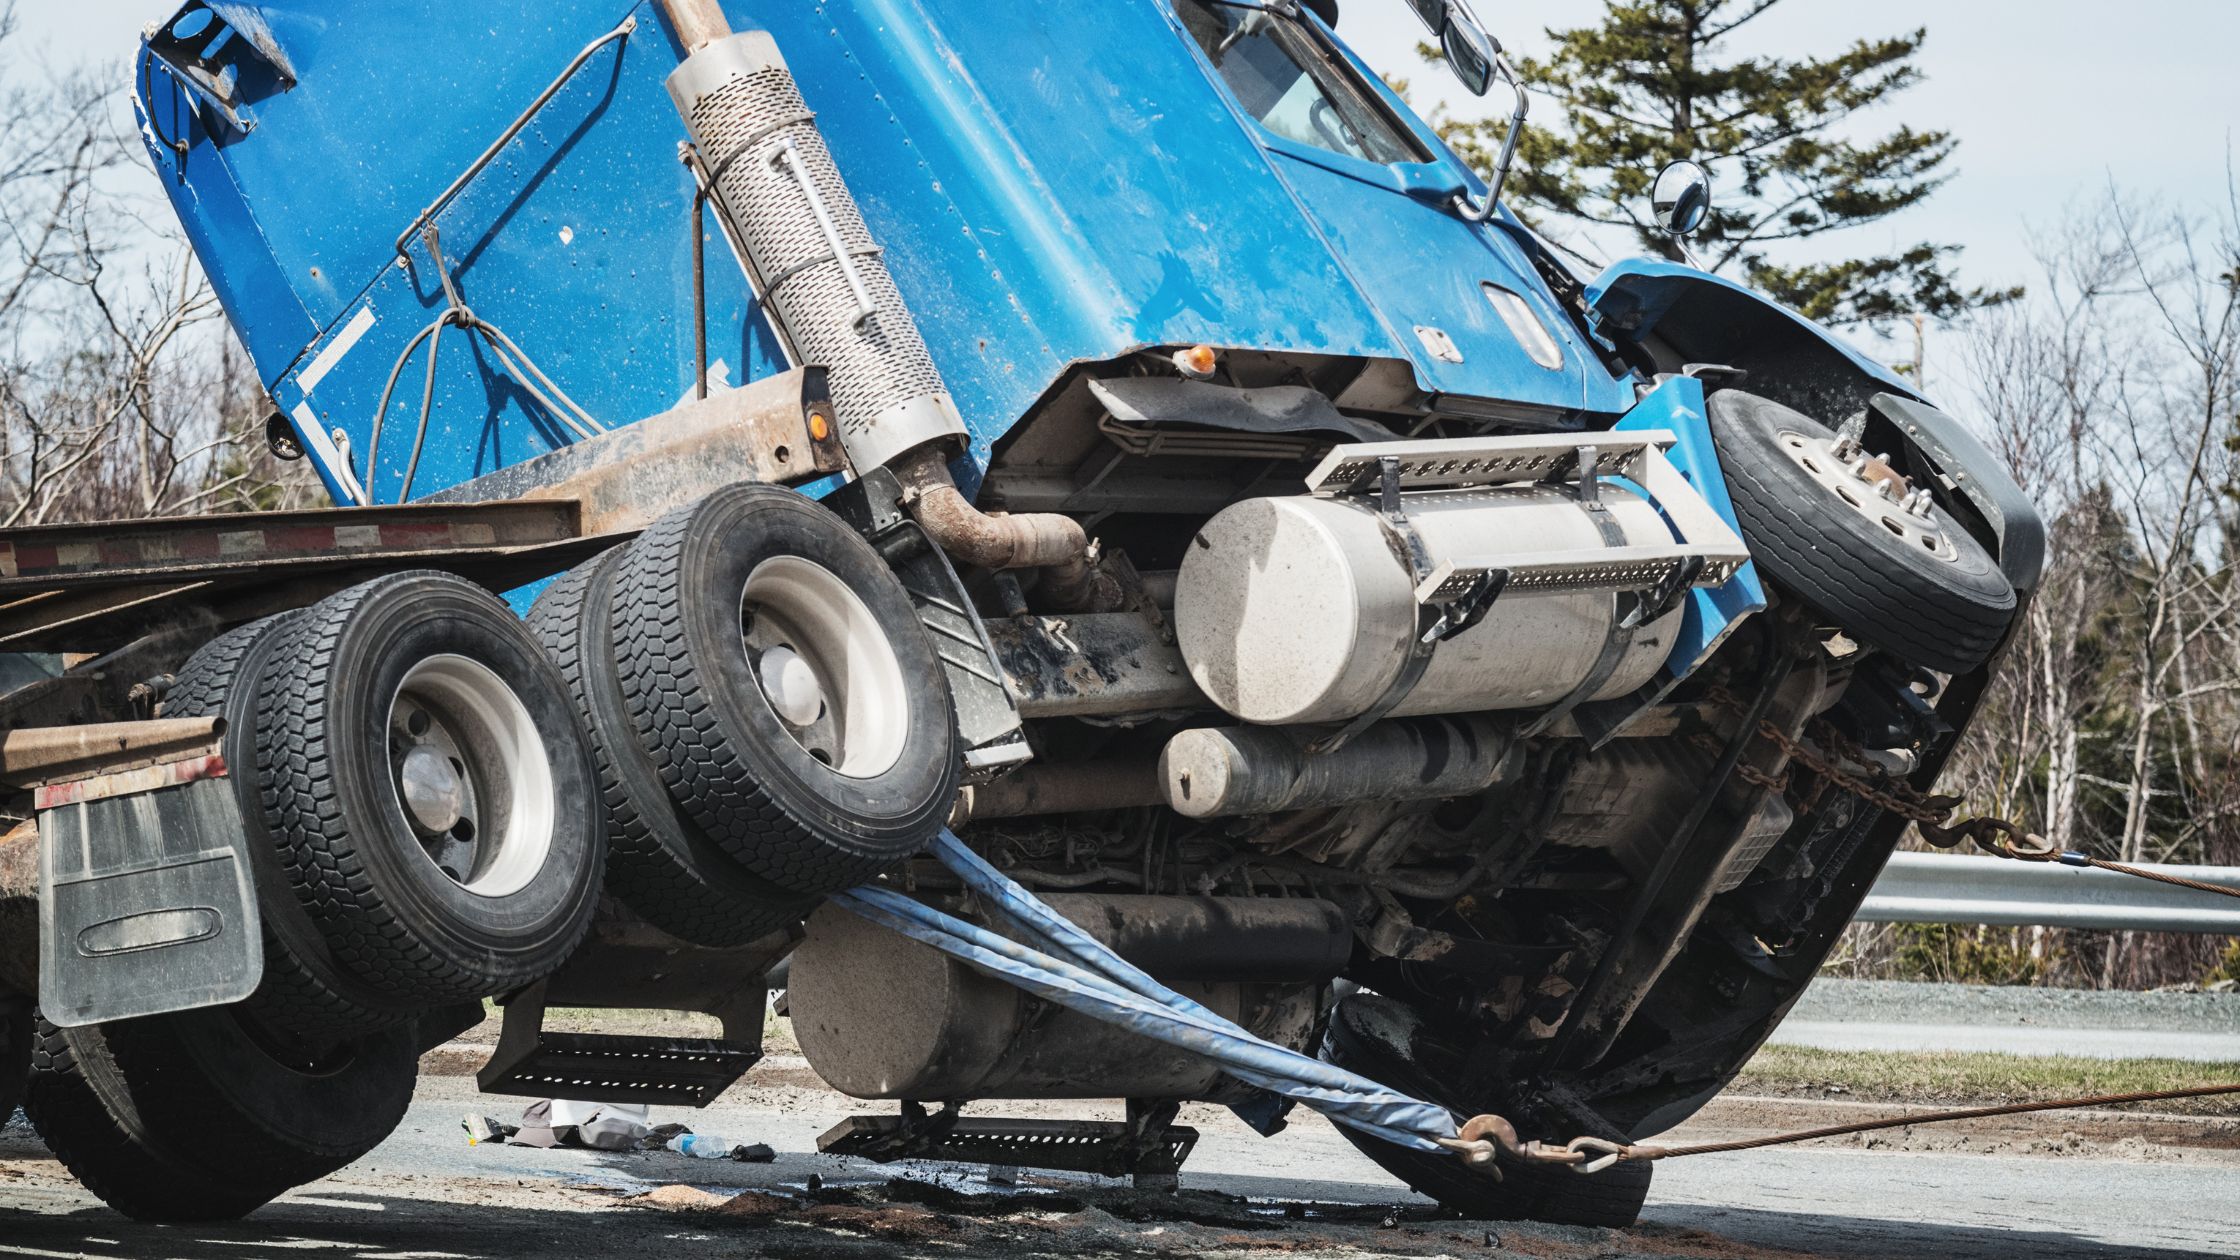 Overturned blue truck after an accident, depicting the type of incident that would require an Alamo Heights truck accident lawyer's expertise.